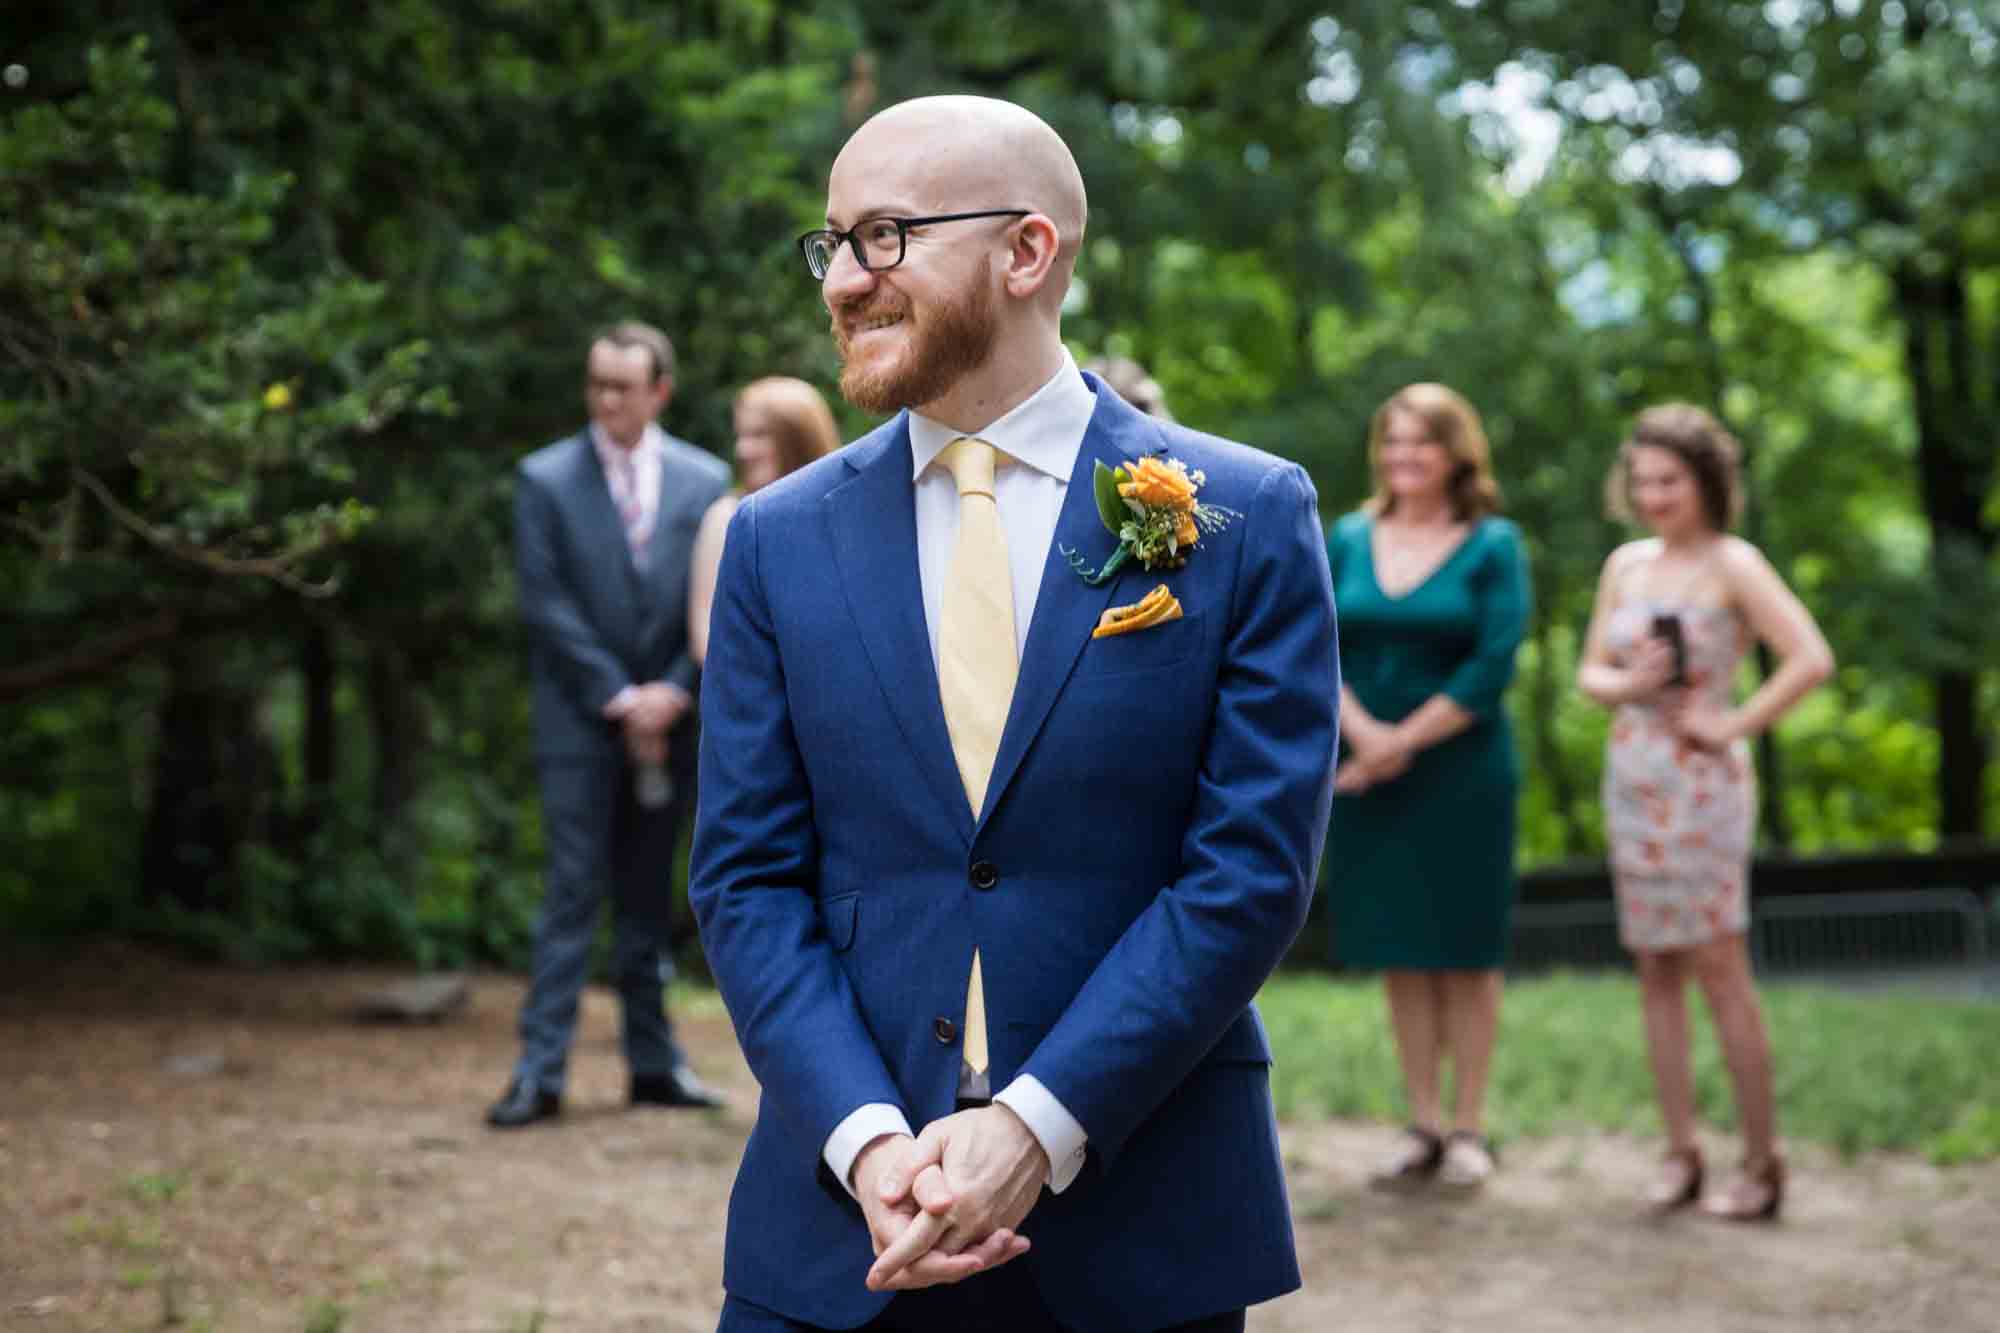 Groom waiting for bride in front of guests for an article on how to select a wedding date